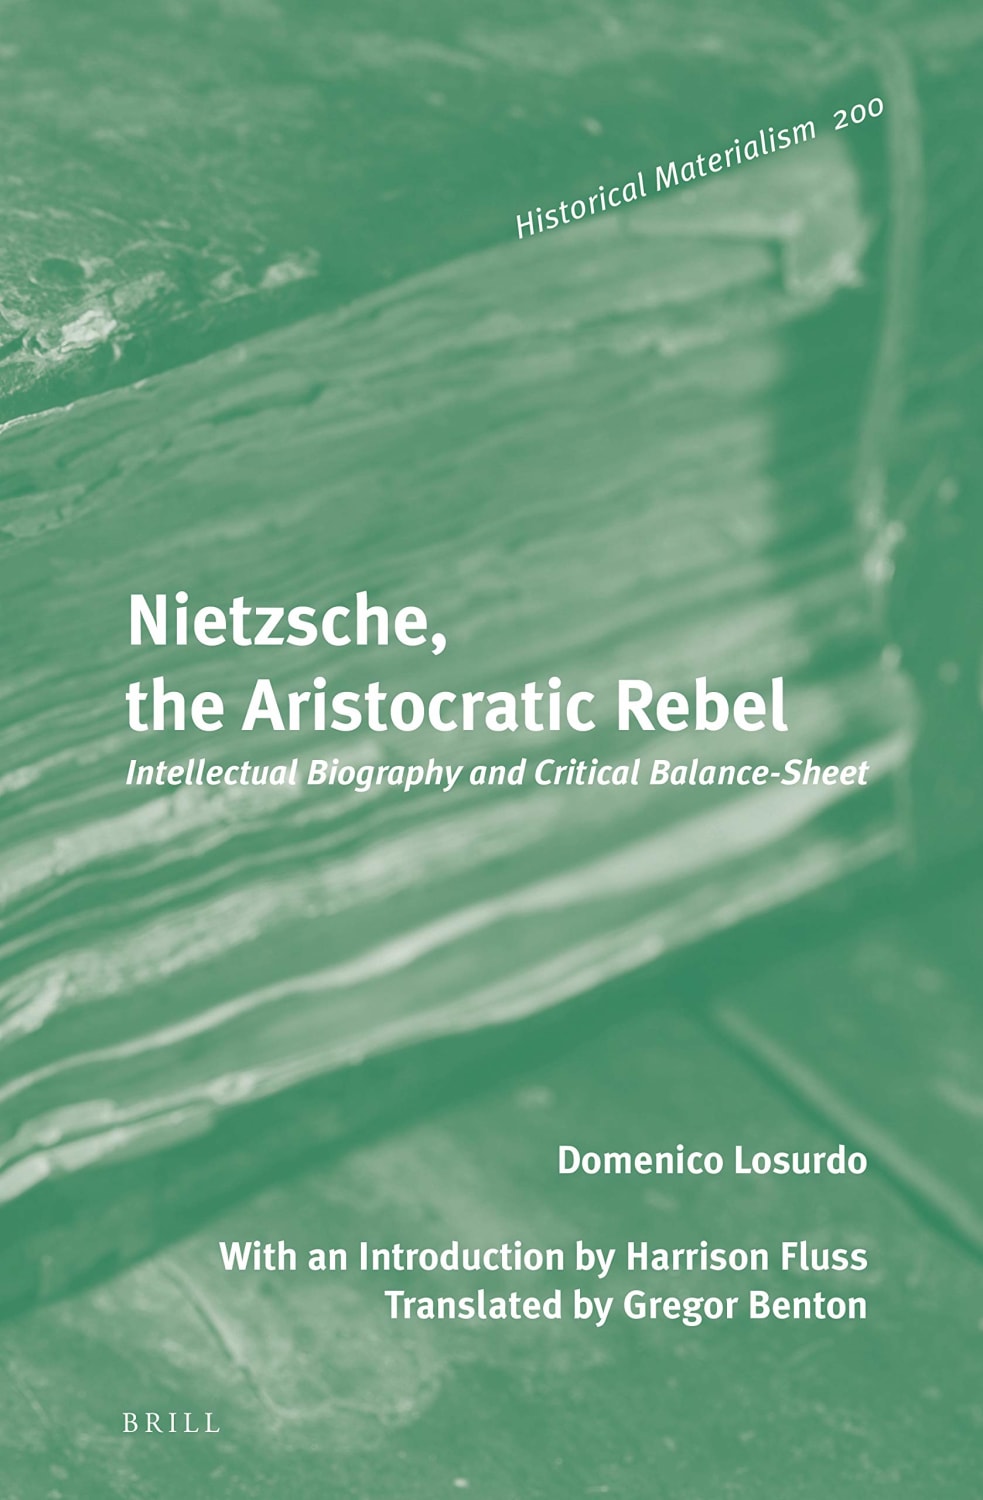 "Losurdo’s big book on Nietzsche is the heftiest counterweight against selective, contentiously unpolitical readings of the German philosopher"